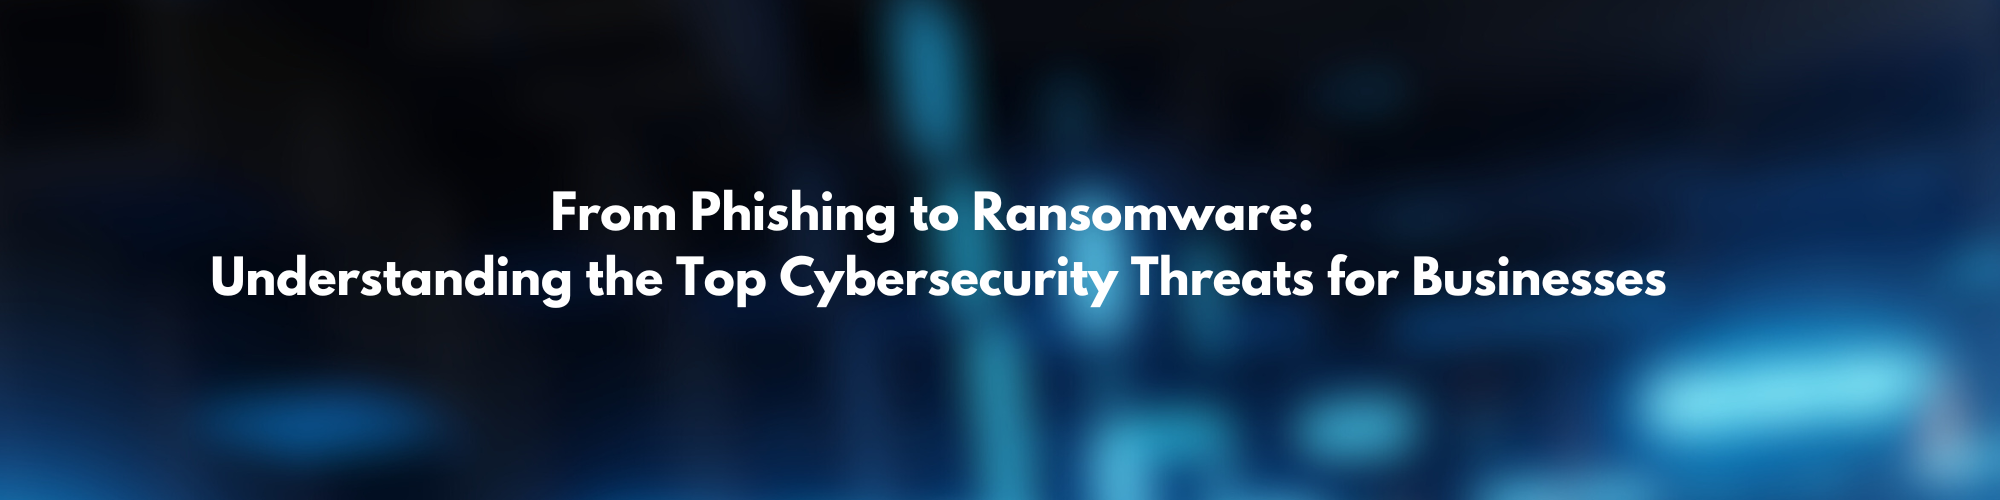 From Phishing to Ransomware: Understanding the Top Cybersecurity Threats for Businesses